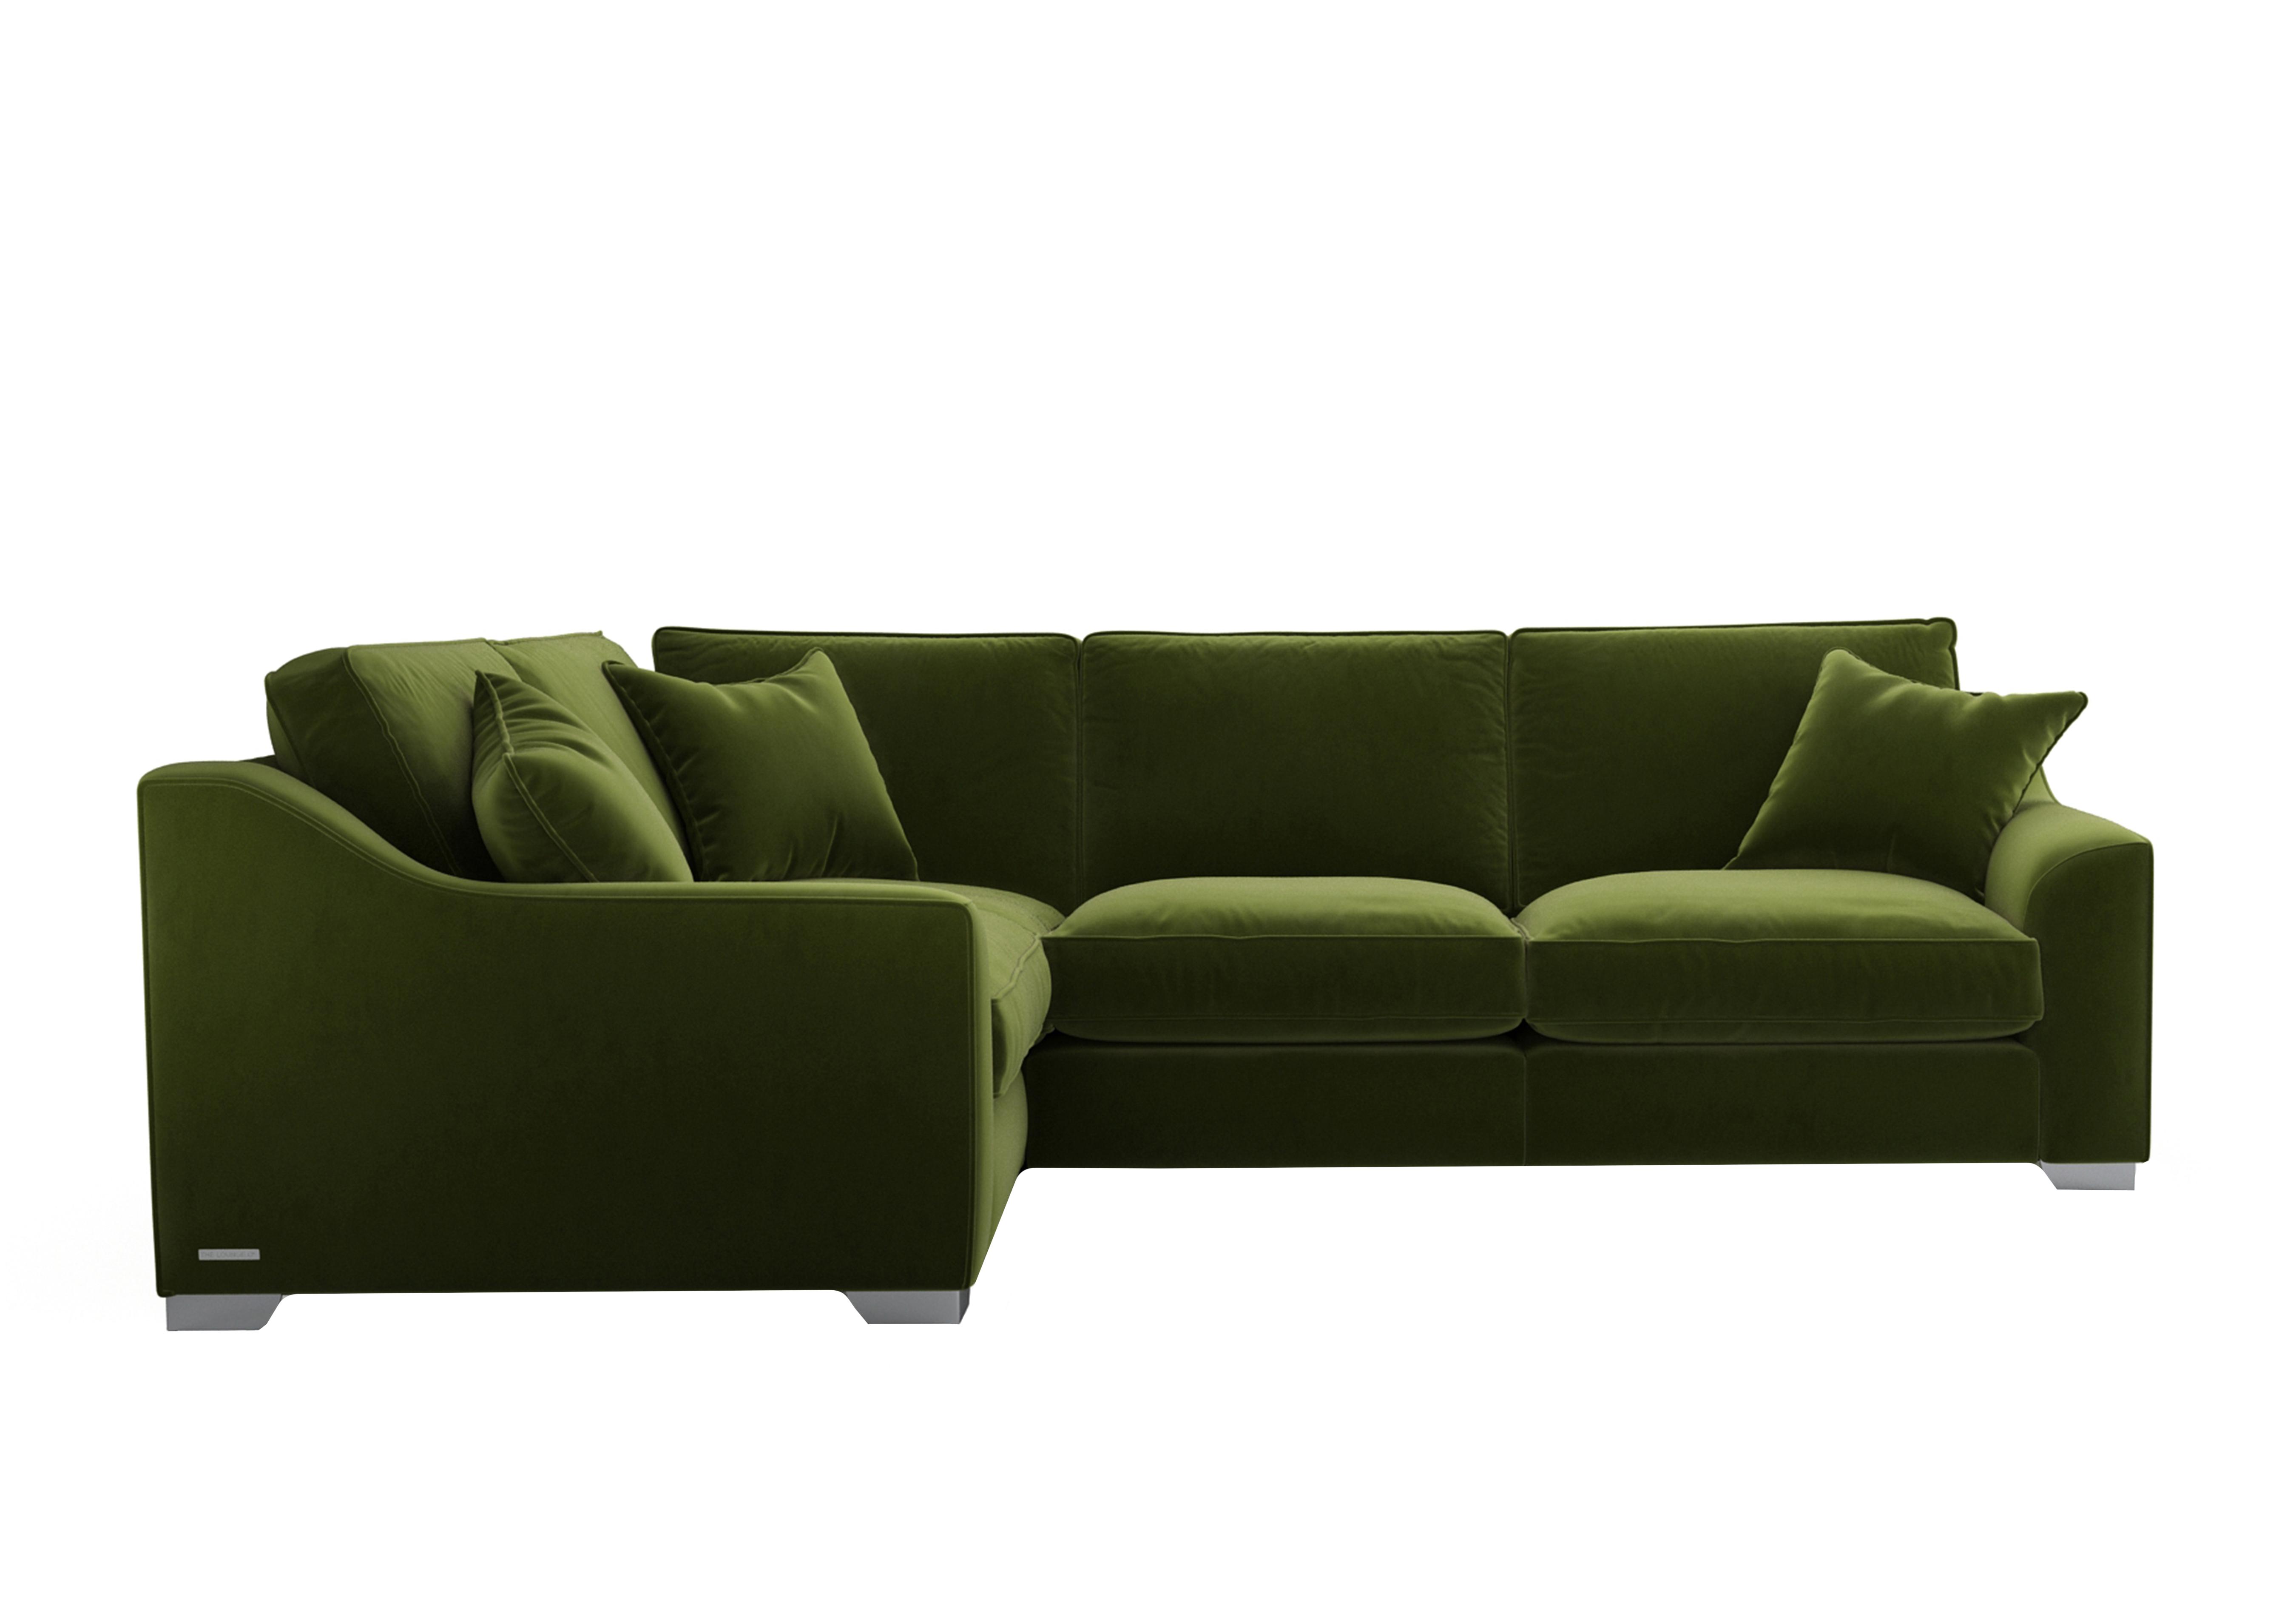 Isobel Small Fabric Corner Sofa in Woo160 Woodland Moss Ch Ft on Furniture Village